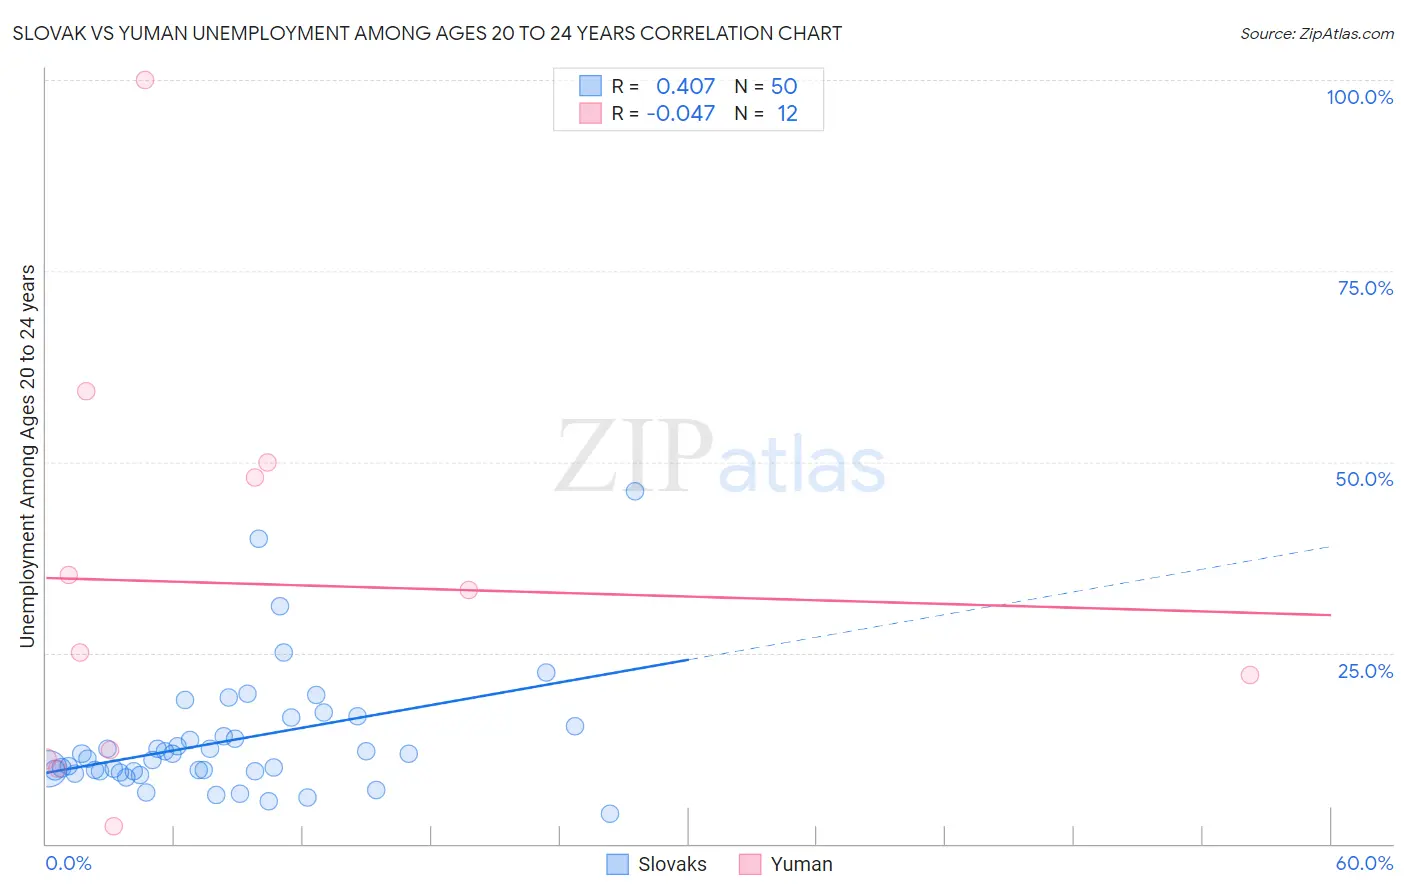 Slovak vs Yuman Unemployment Among Ages 20 to 24 years